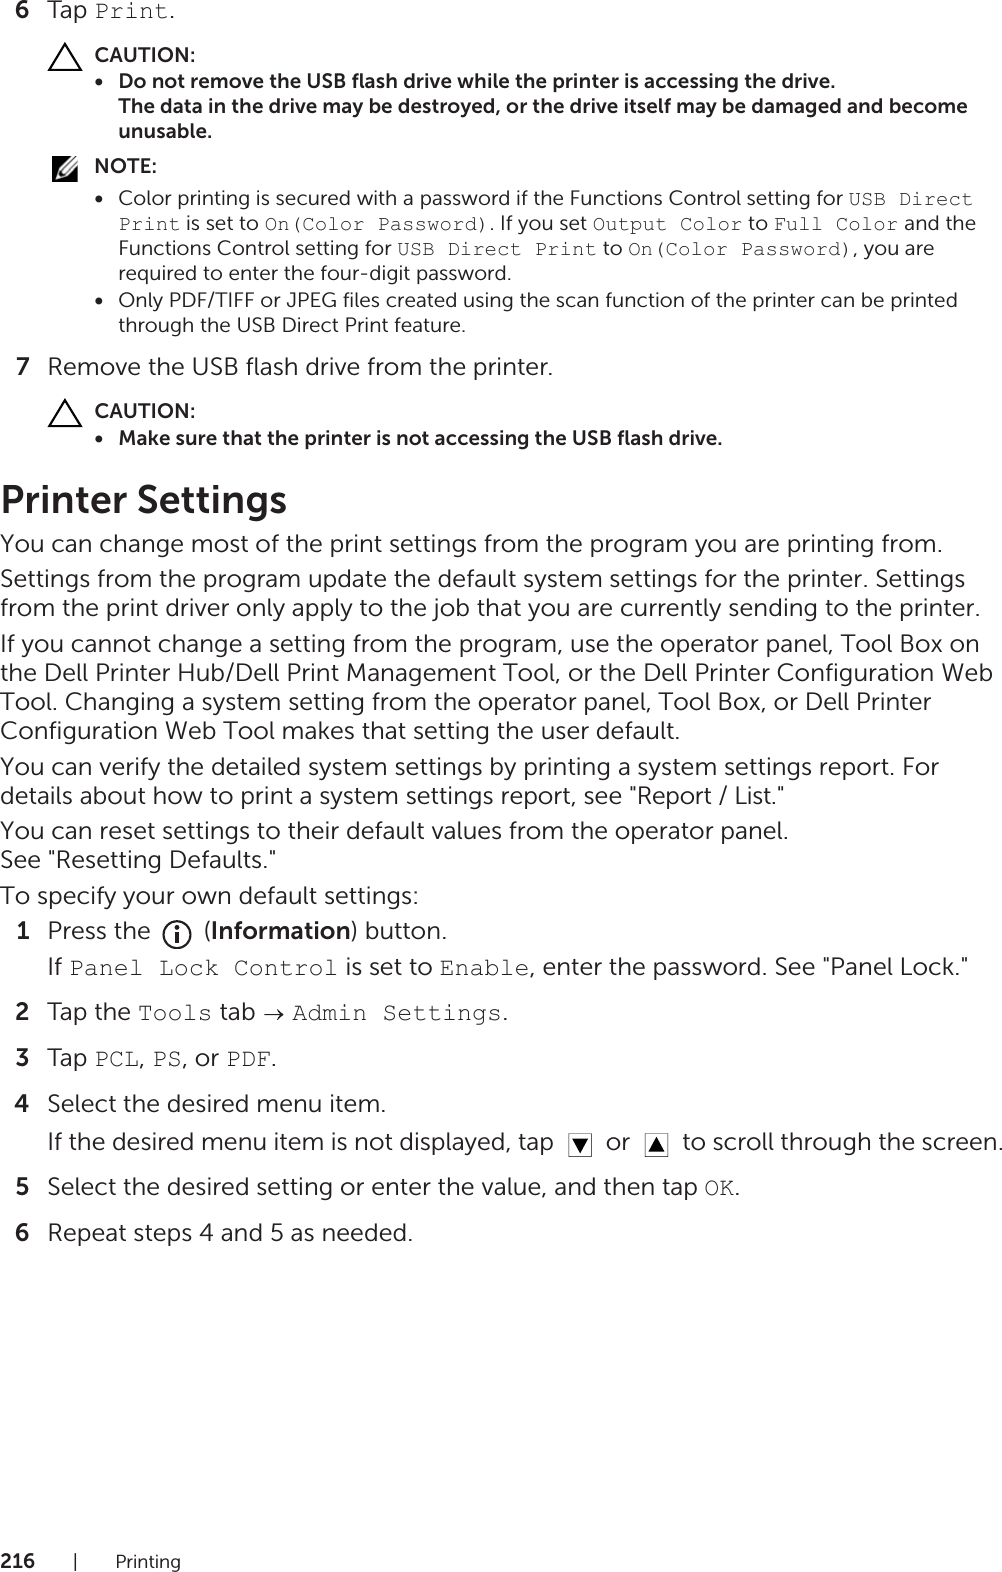 216|Printing6Tap Print.CAUTION:• Do not remove the USB flash drive while the printer is accessing the drive.The data in the drive may be destroyed, or the drive itself may be damaged and become unusable.NOTE:•Color printing is secured with a password if the Functions Control setting for USB Direct Print is set to On(Color Password). If you set Output Color to Full Color and the Functions Control setting for USB Direct Print to On(Color Password), you are required to enter the four-digit password.•Only PDF/TIFF or JPEG files created using the scan function of the printer can be printed through the USB Direct Print feature.7Remove the USB flash drive from the printer.CAUTION:• Make sure that the printer is not accessing the USB flash drive.Printer SettingsYou can change most of the print settings from the program you are printing from.Settings from the program update the default system settings for the printer. Settings from the print driver only apply to the job that you are currently sending to the printer.If you cannot change a setting from the program, use the operator panel, Tool Box on the Dell Printer Hub/Dell Print Management Tool, or the Dell Printer Configuration Web Tool. Changing a system setting from the operator panel, Tool Box, or Dell Printer Configuration Web Tool makes that setting the user default.You can verify the detailed system settings by printing a system settings report. For details about how to print a system settings report, see &quot;Report / List.&quot;You can reset settings to their default values from the operator panel.See &quot;Resetting Defaults.&quot;To specify your own default settings:1Press the   (Information) button.If Panel Lock Control is set to Enable, enter the password. See &quot;Panel Lock.&quot;2Tap the Tools tab   Admin Settings.3Tap PCL, PS, or PDF.4Select the desired menu item.If the desired menu item is not displayed, tap   or   to scroll through the screen.5Select the desired setting or enter the value, and then tap OK.6Repeat steps 4 and 5 as needed.